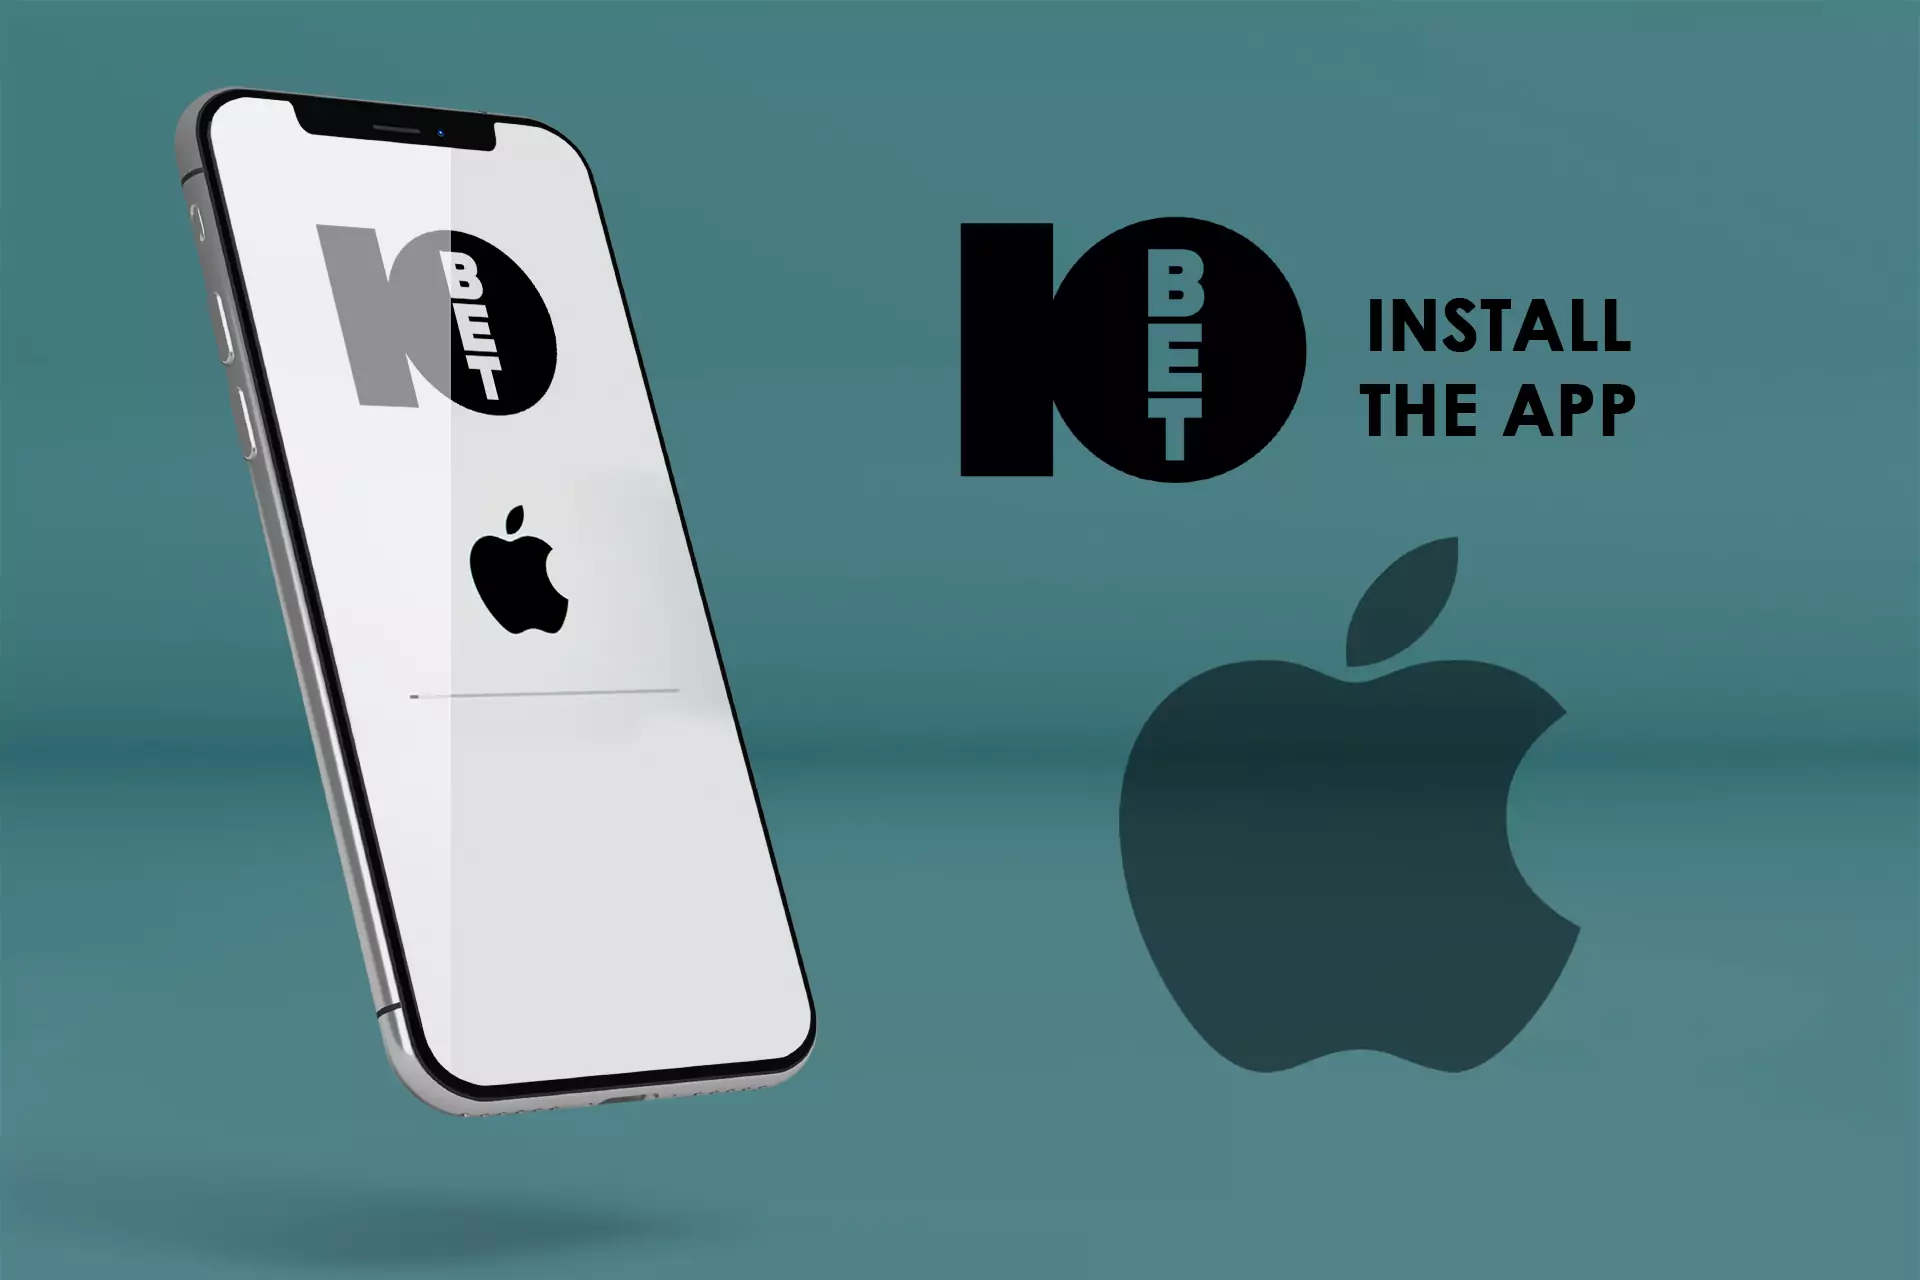 Install the application from the App Store.